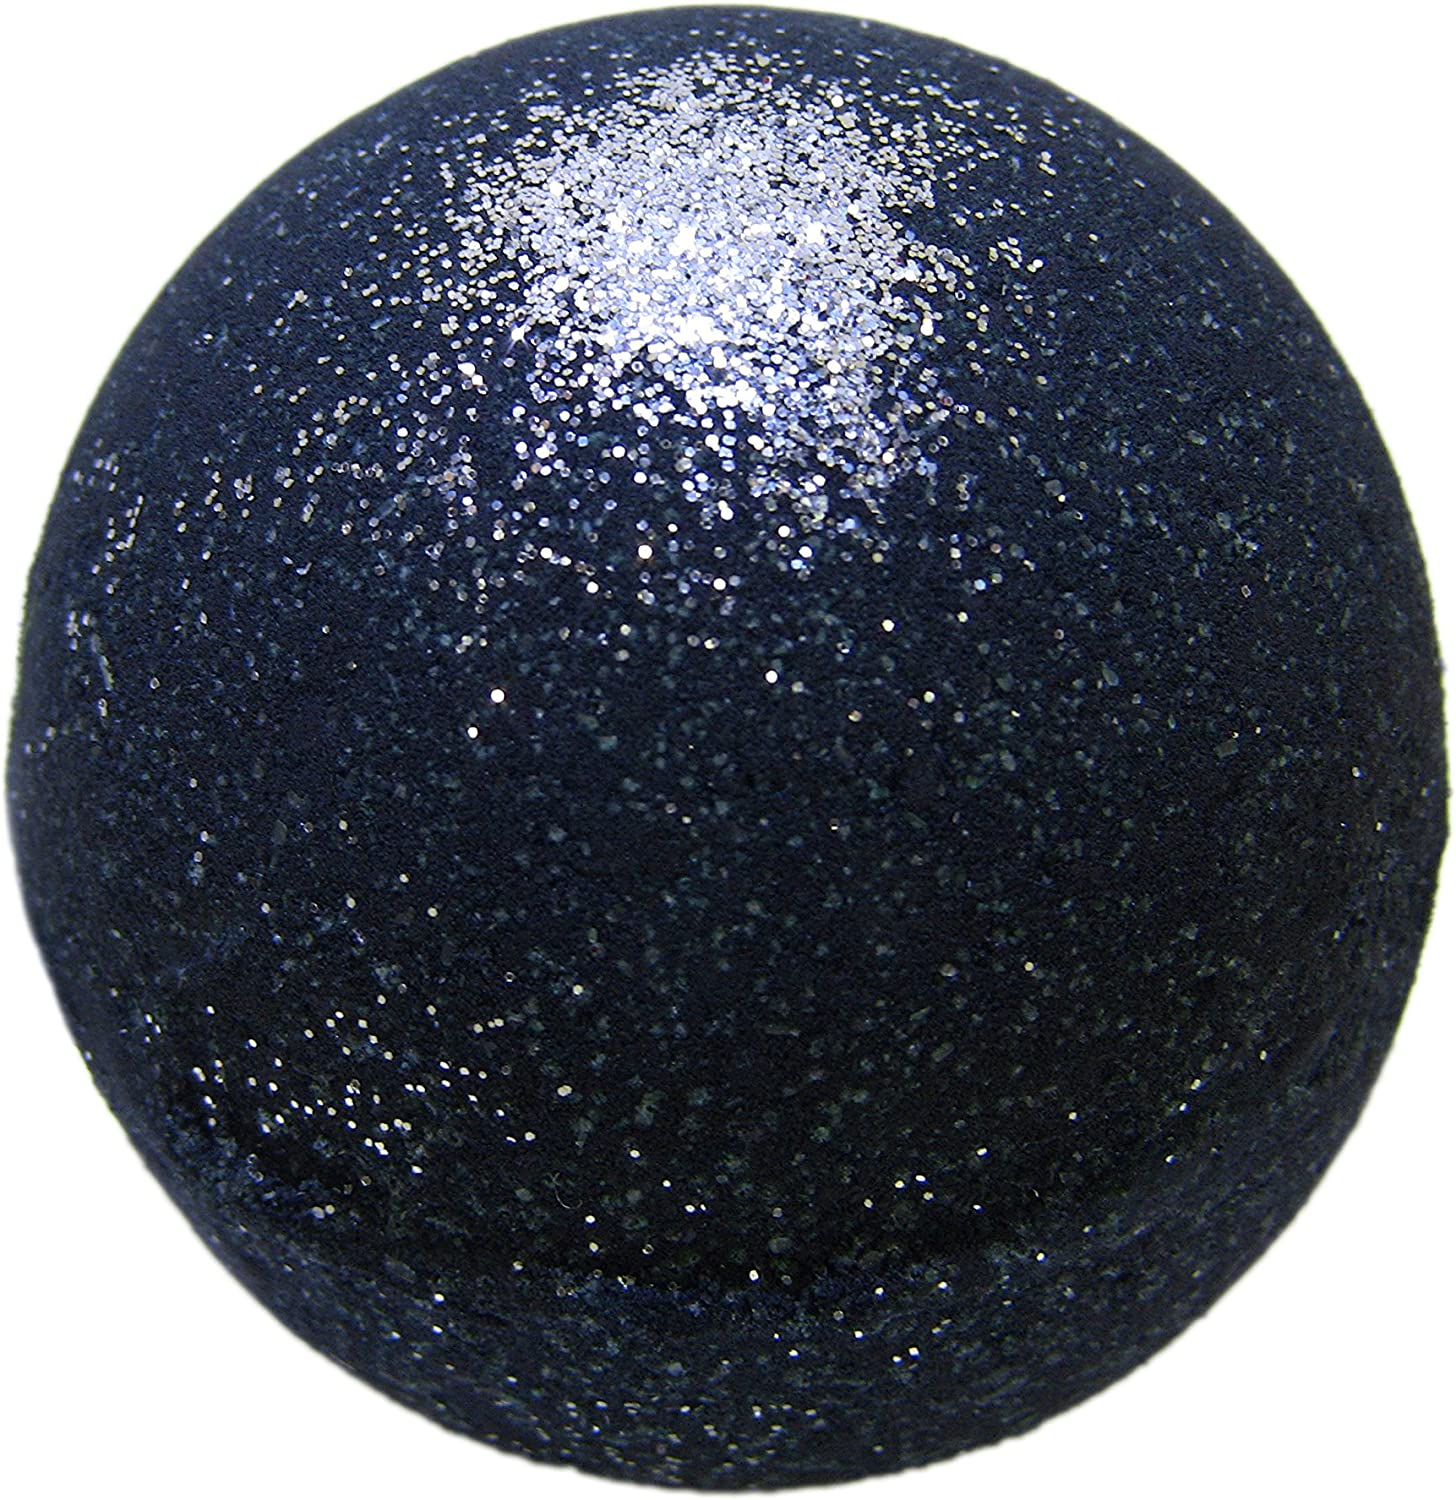 Private Label Bath Bomb With Glitter Wholesale At Low MOQ 